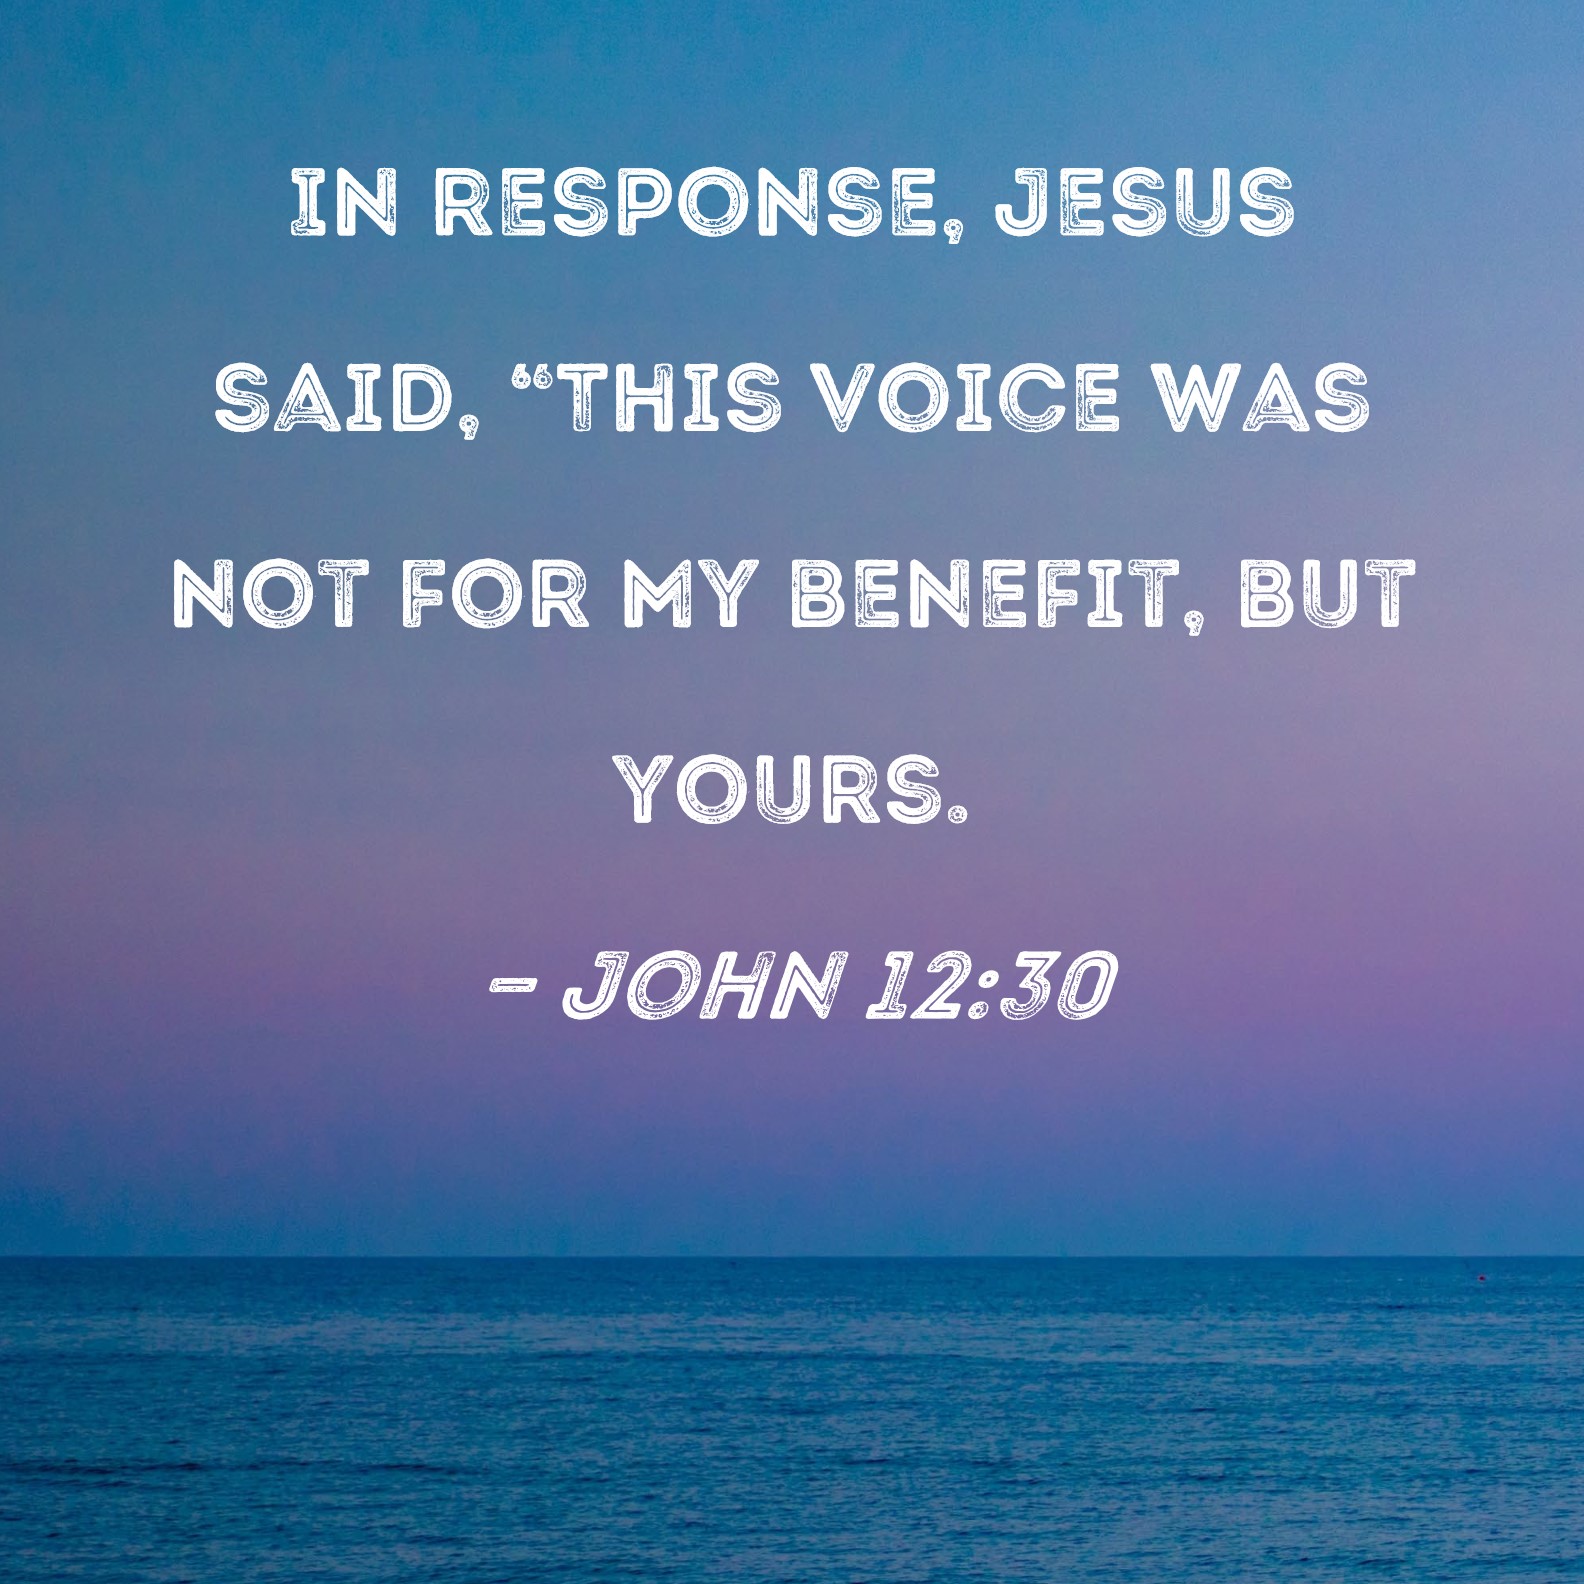 john-12-30-in-response-jesus-said-this-voice-was-not-for-my-benefit